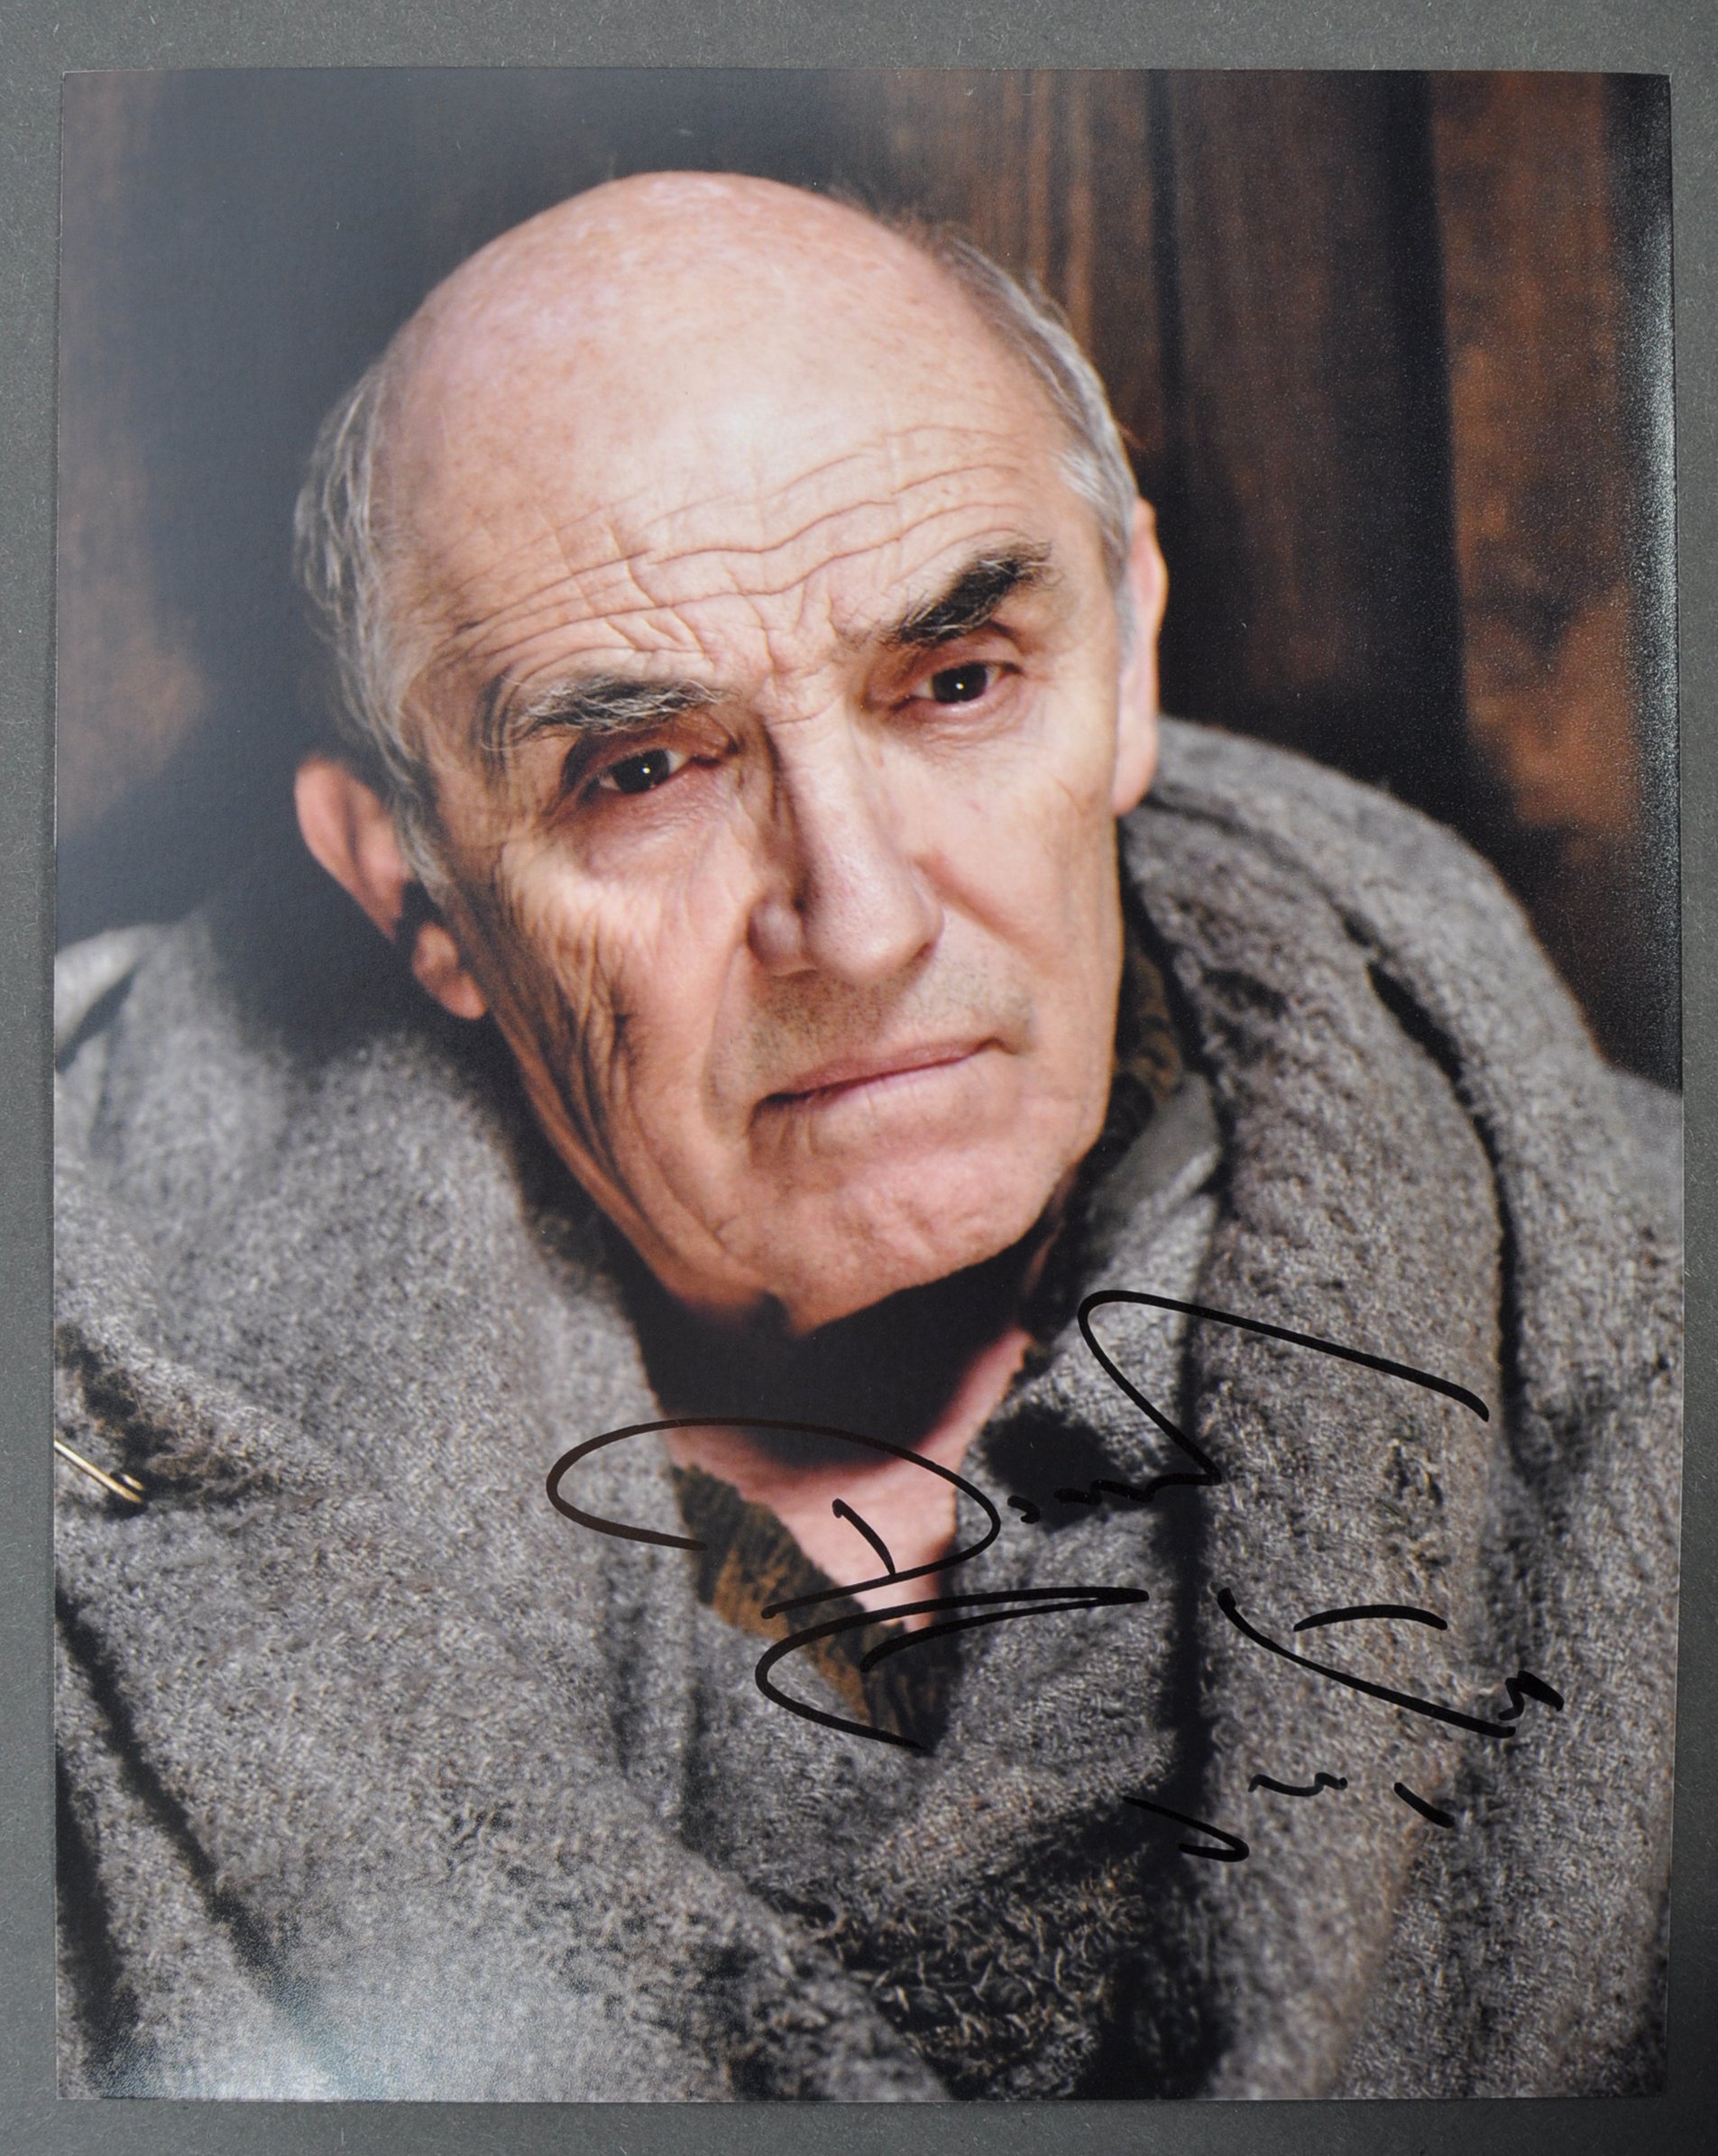 GAME OF THRONES - DONALD SUMPTER - SIGNED PHOTOGRAPH